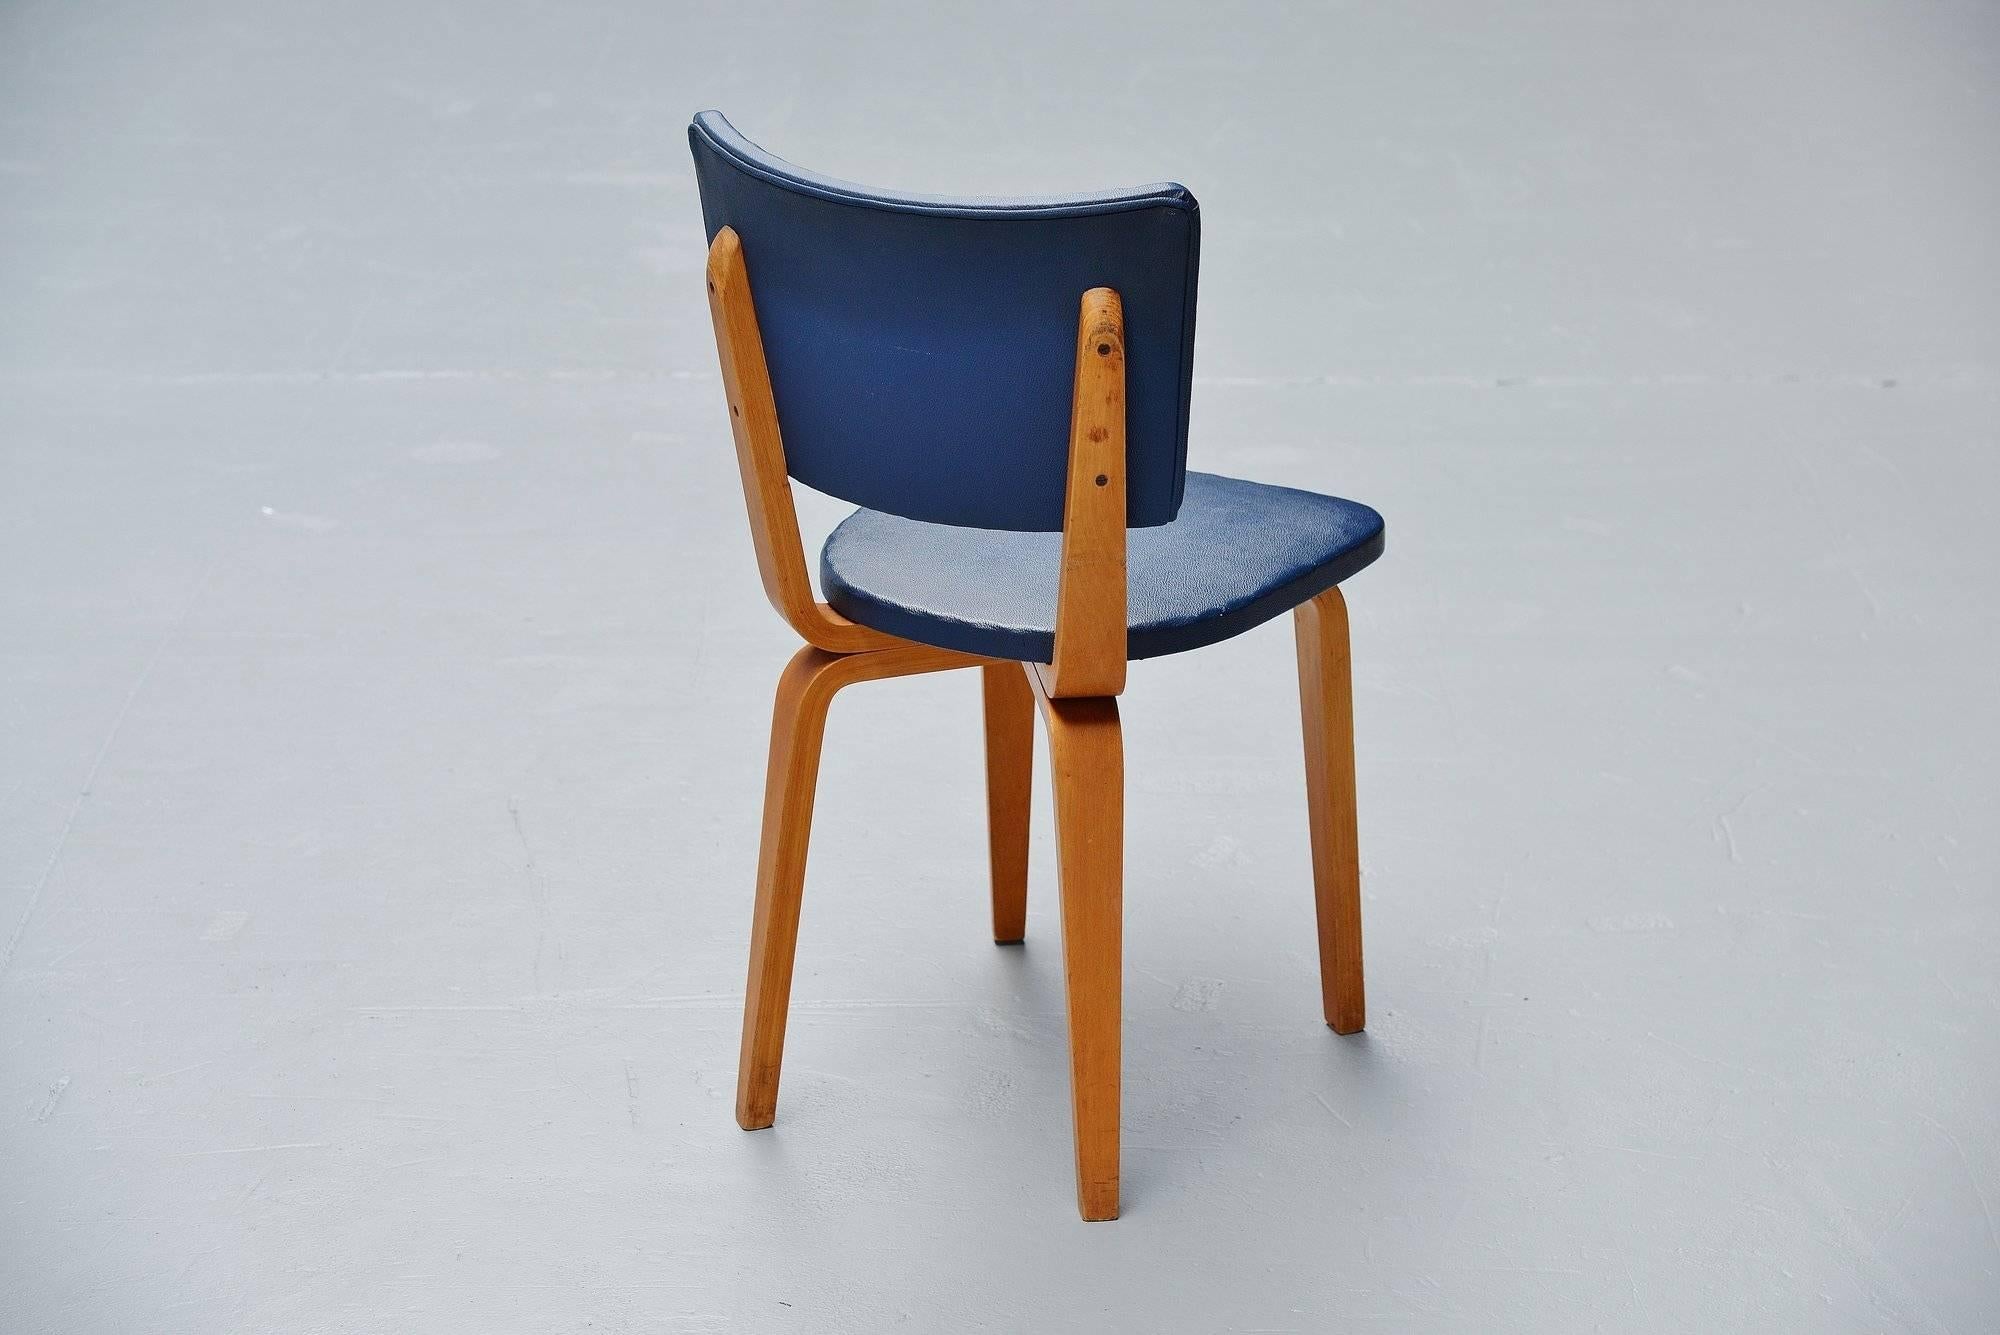 Mid-20th Century Cor Alons Plywood Dining Chairs in Blue Faux Leather, 1949